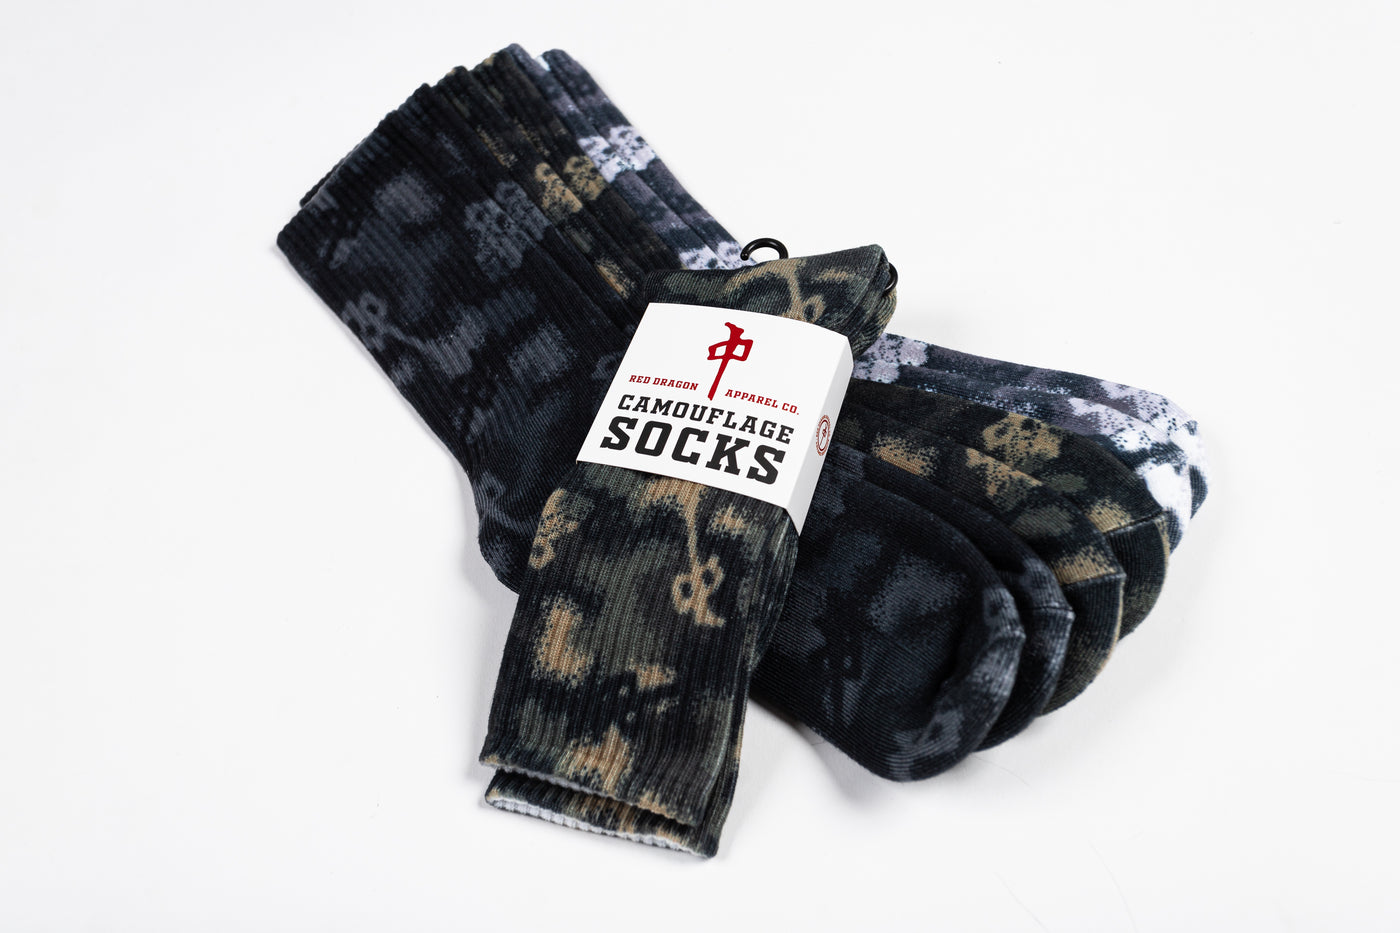 SOCKS - FREE WITH ANY PURCHASE OF $30 OR MORE